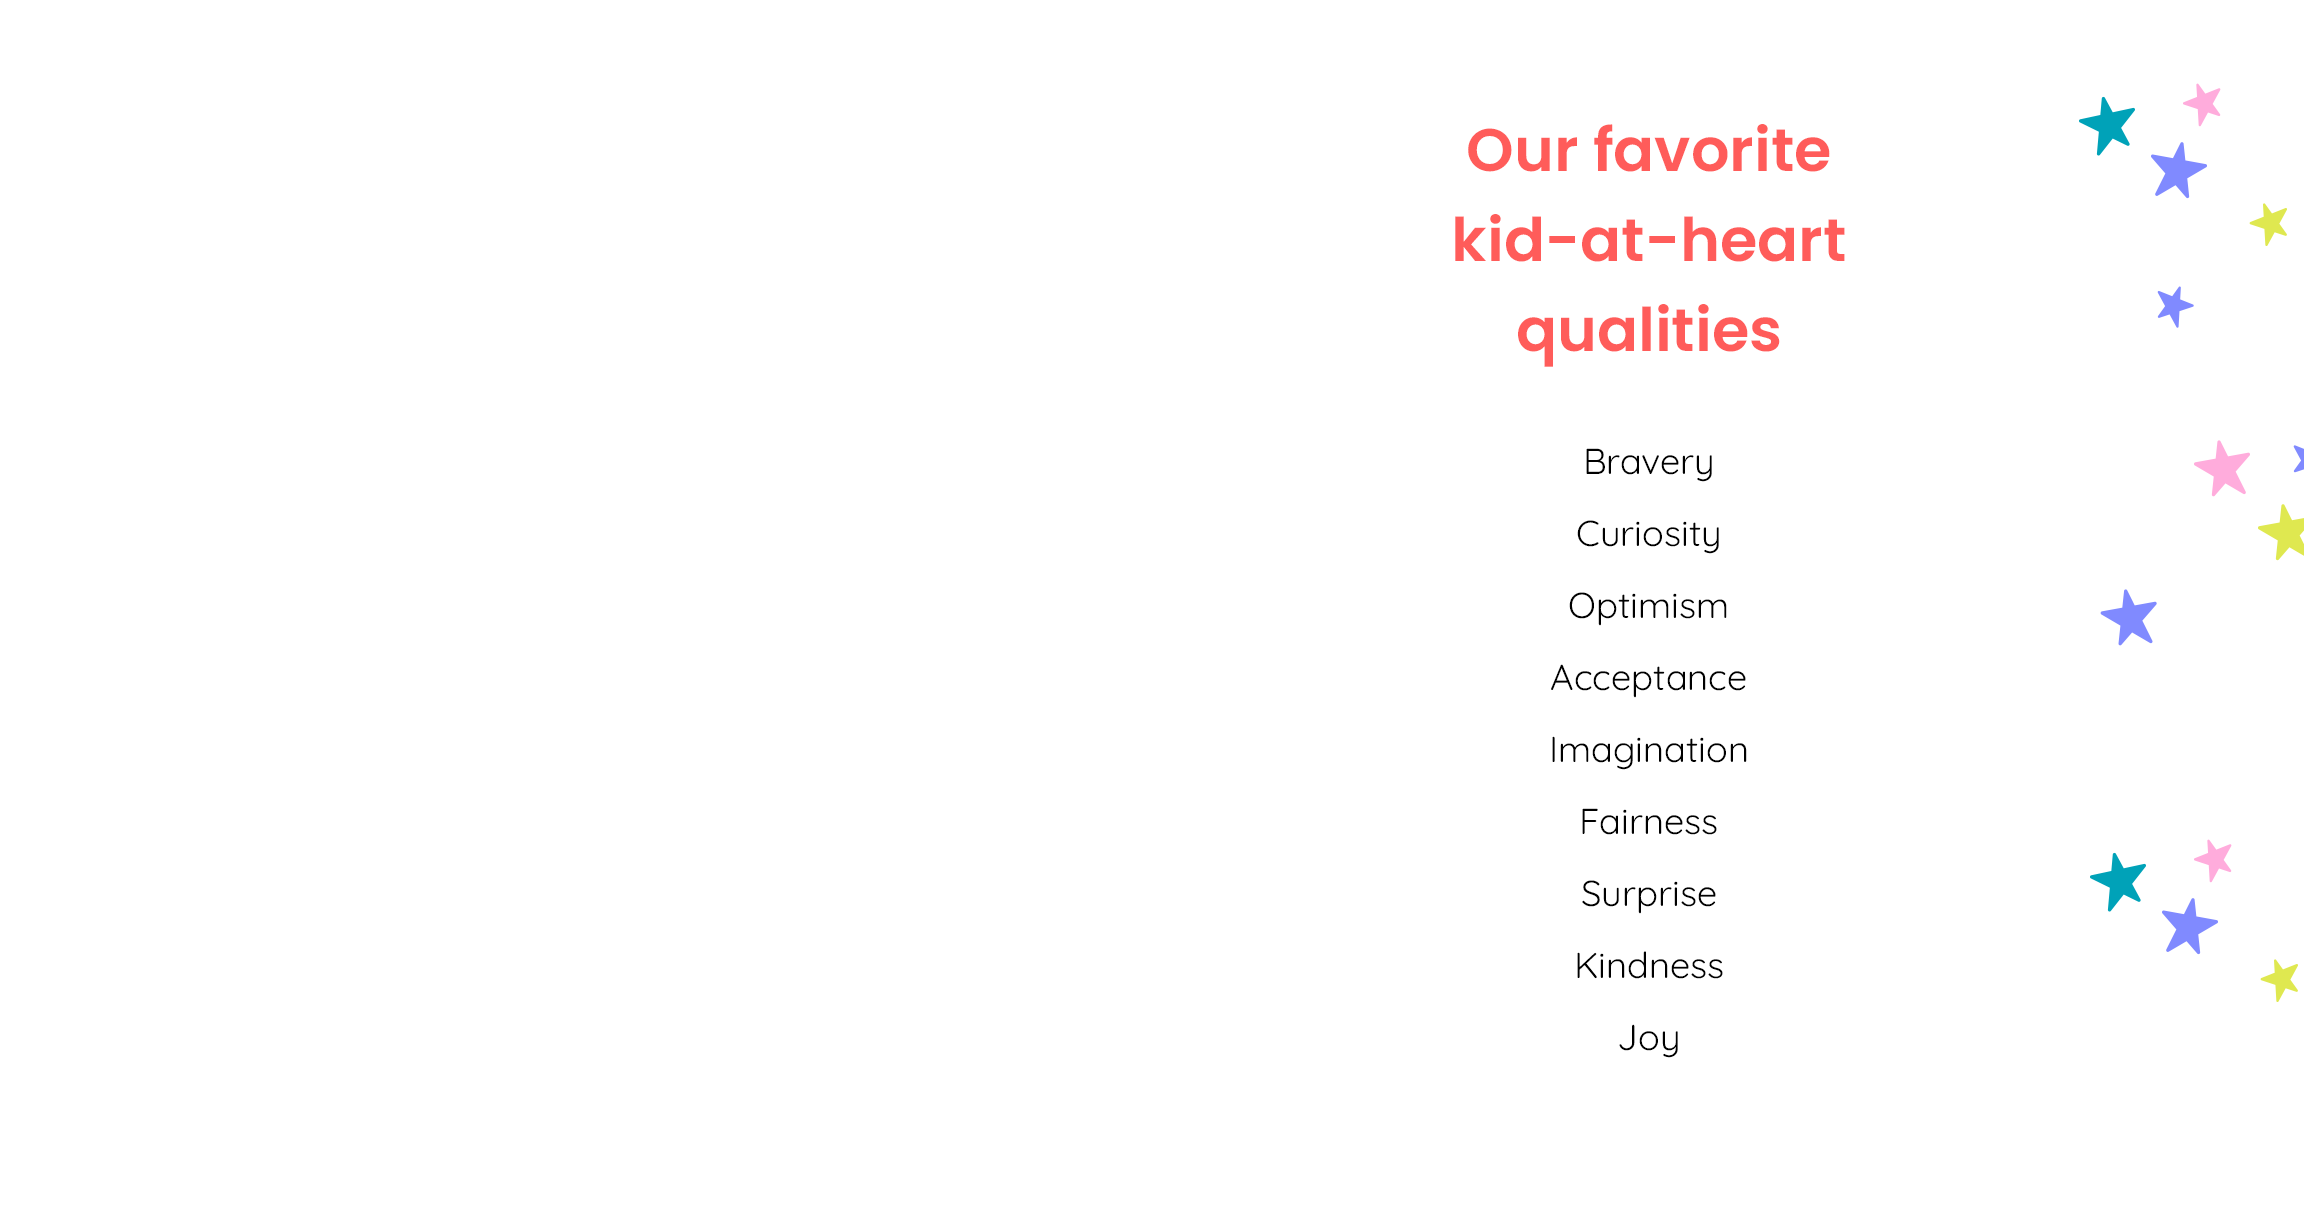 Our favorite kid-at-heart qualities